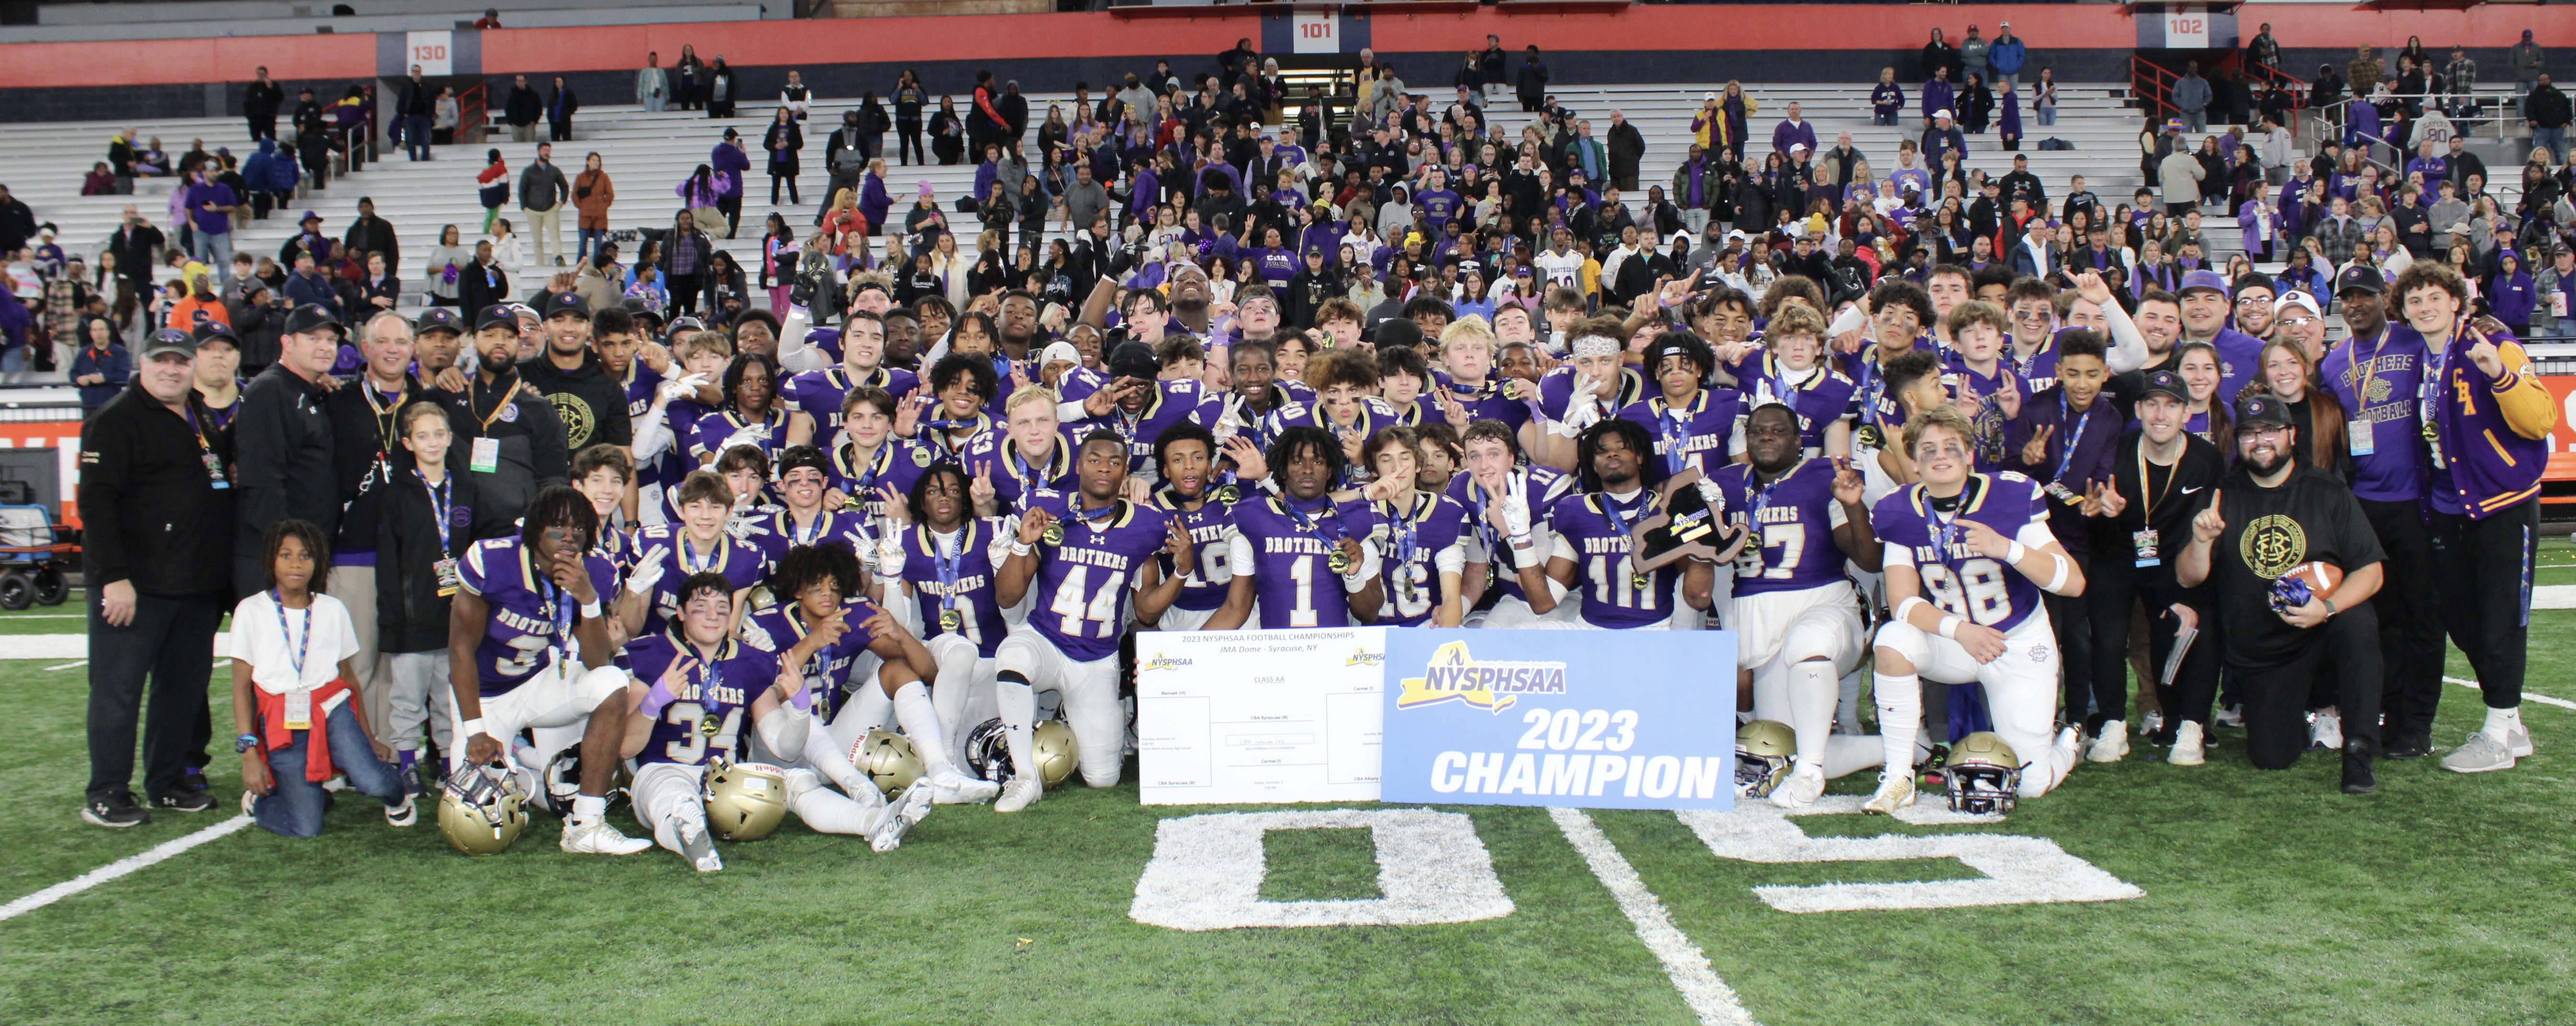 The CBA football team put an exclamation point on the 2023 season, defeating Carmel 31-14 to win the Class AA New York State Title at the JMA Wireless Dome on Sunday night.